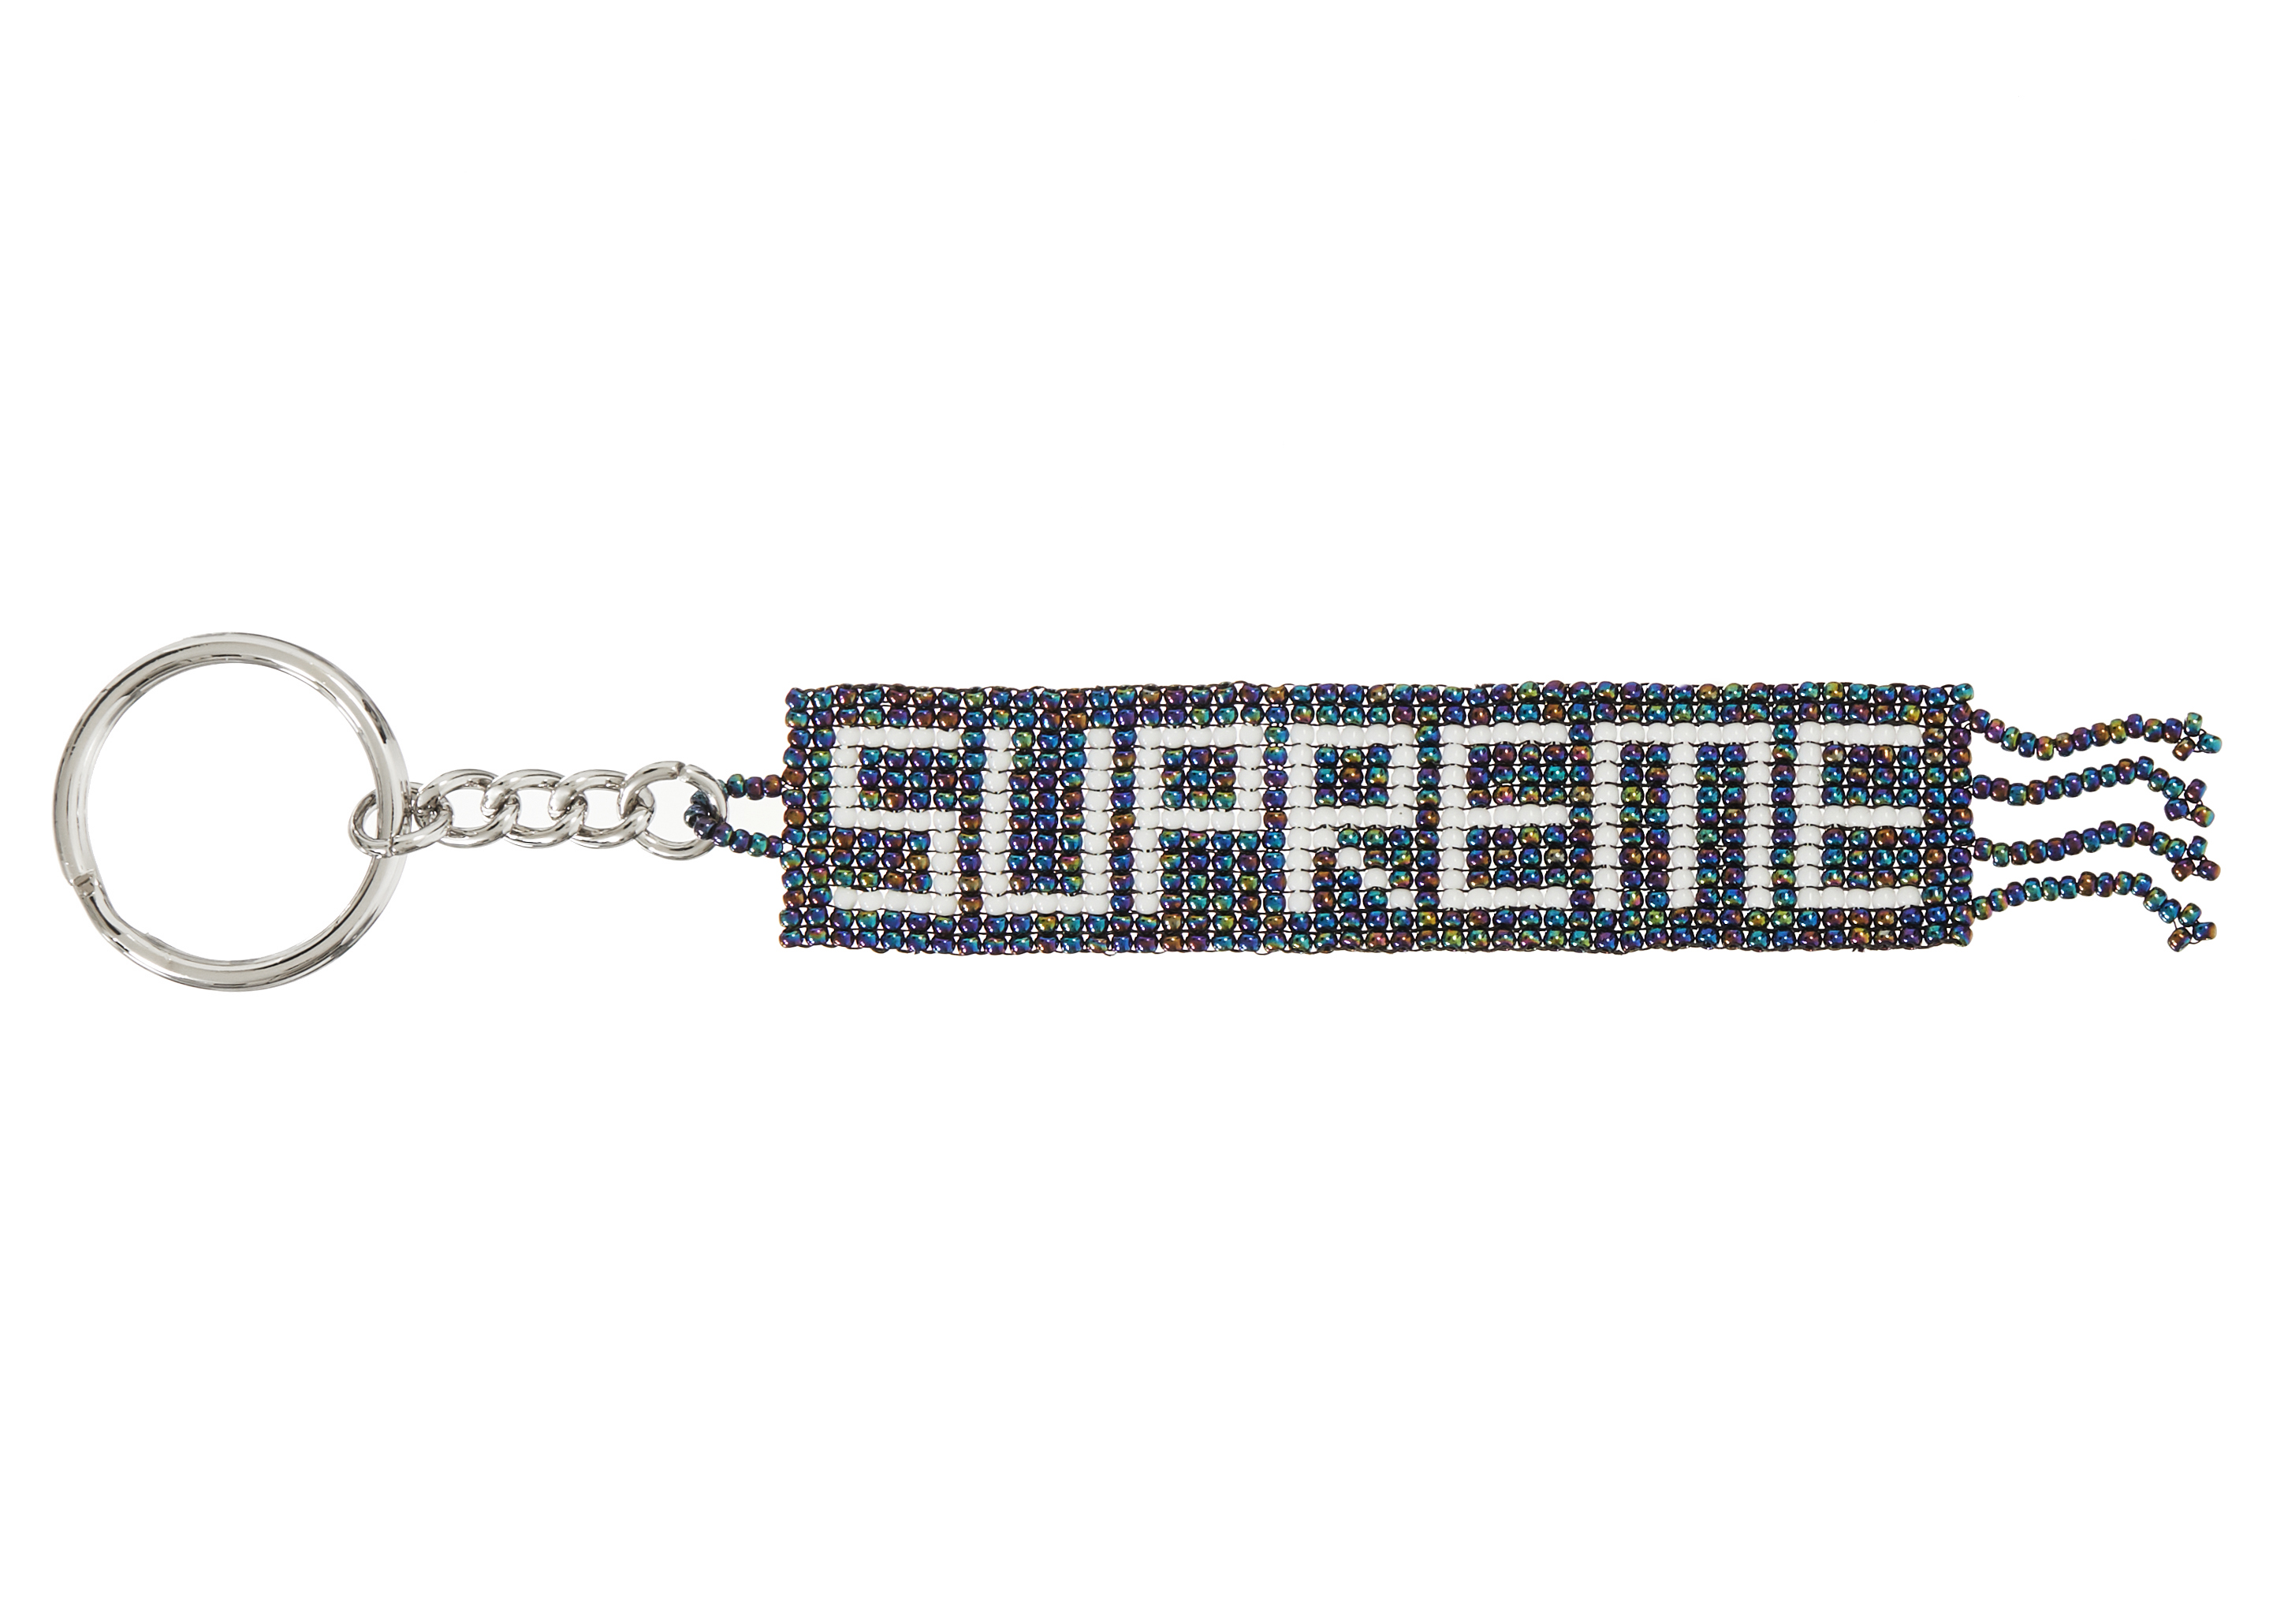 Supreme Webbing Keychain Red - Permanent Collection - GB